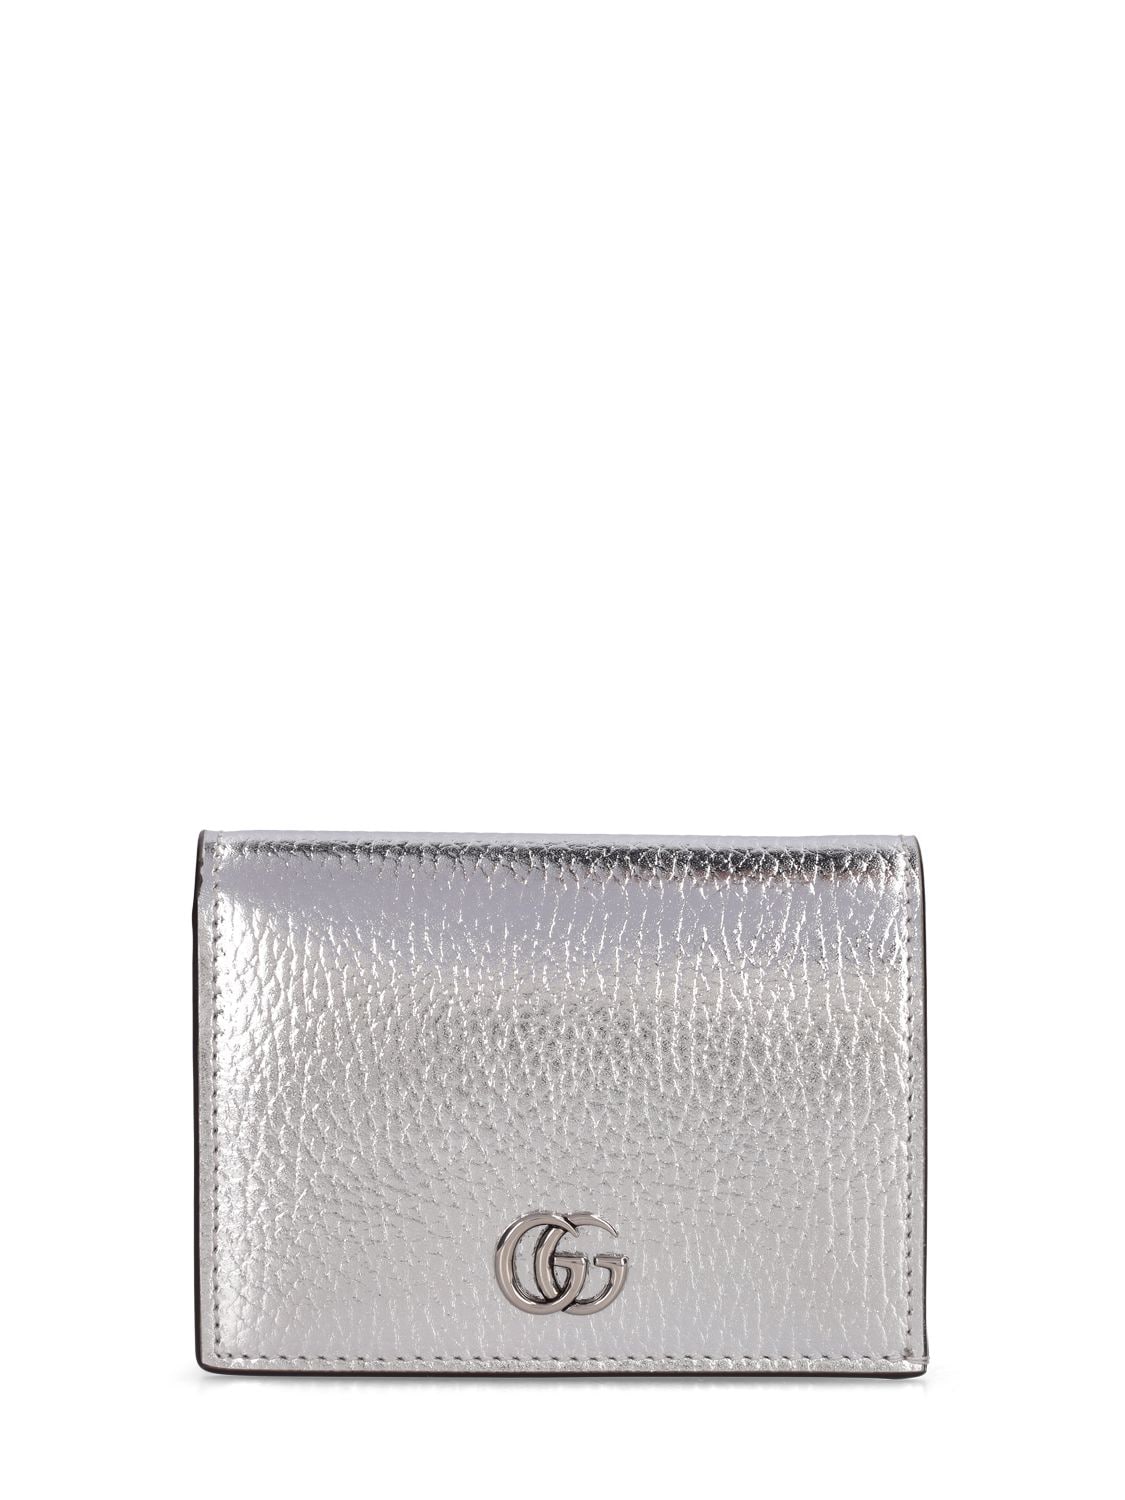 Gucci Gg Petite Marmont Leather Wallet In Silver